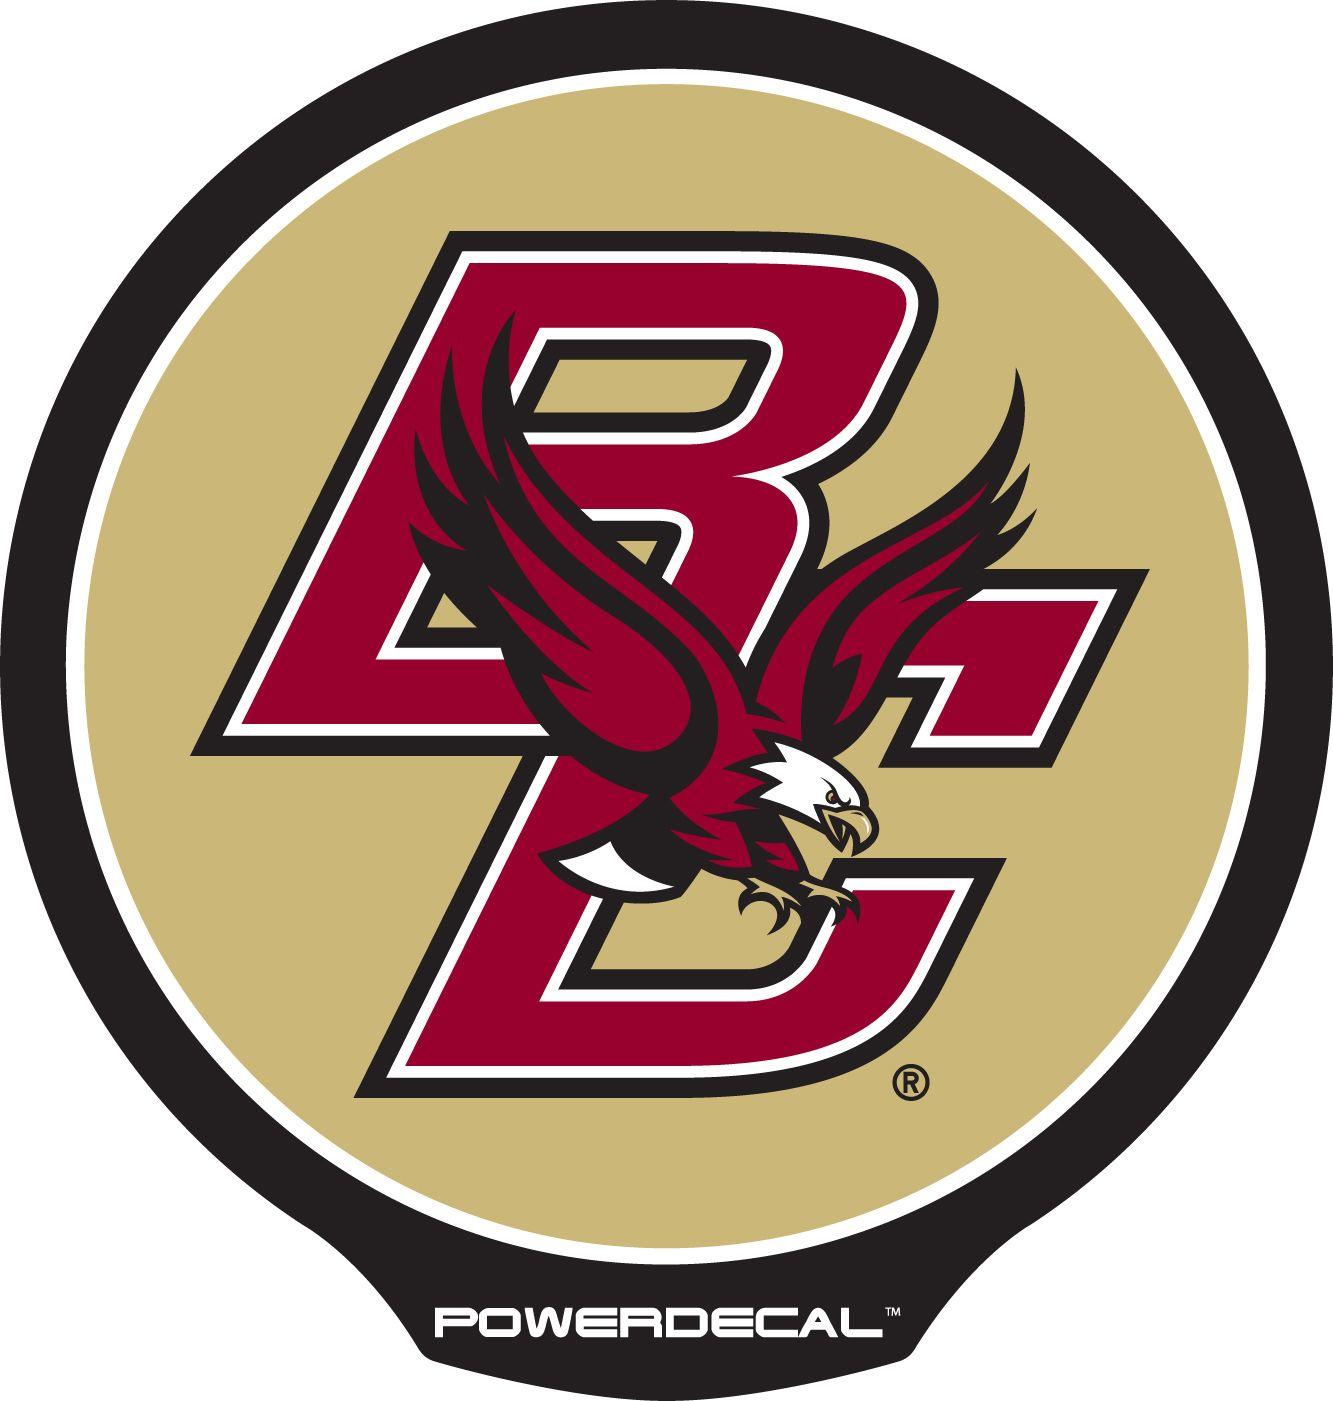 Black White and Gold Logo - PowerDecal PWR240201 Decal College Boston College Eagles Logo ...